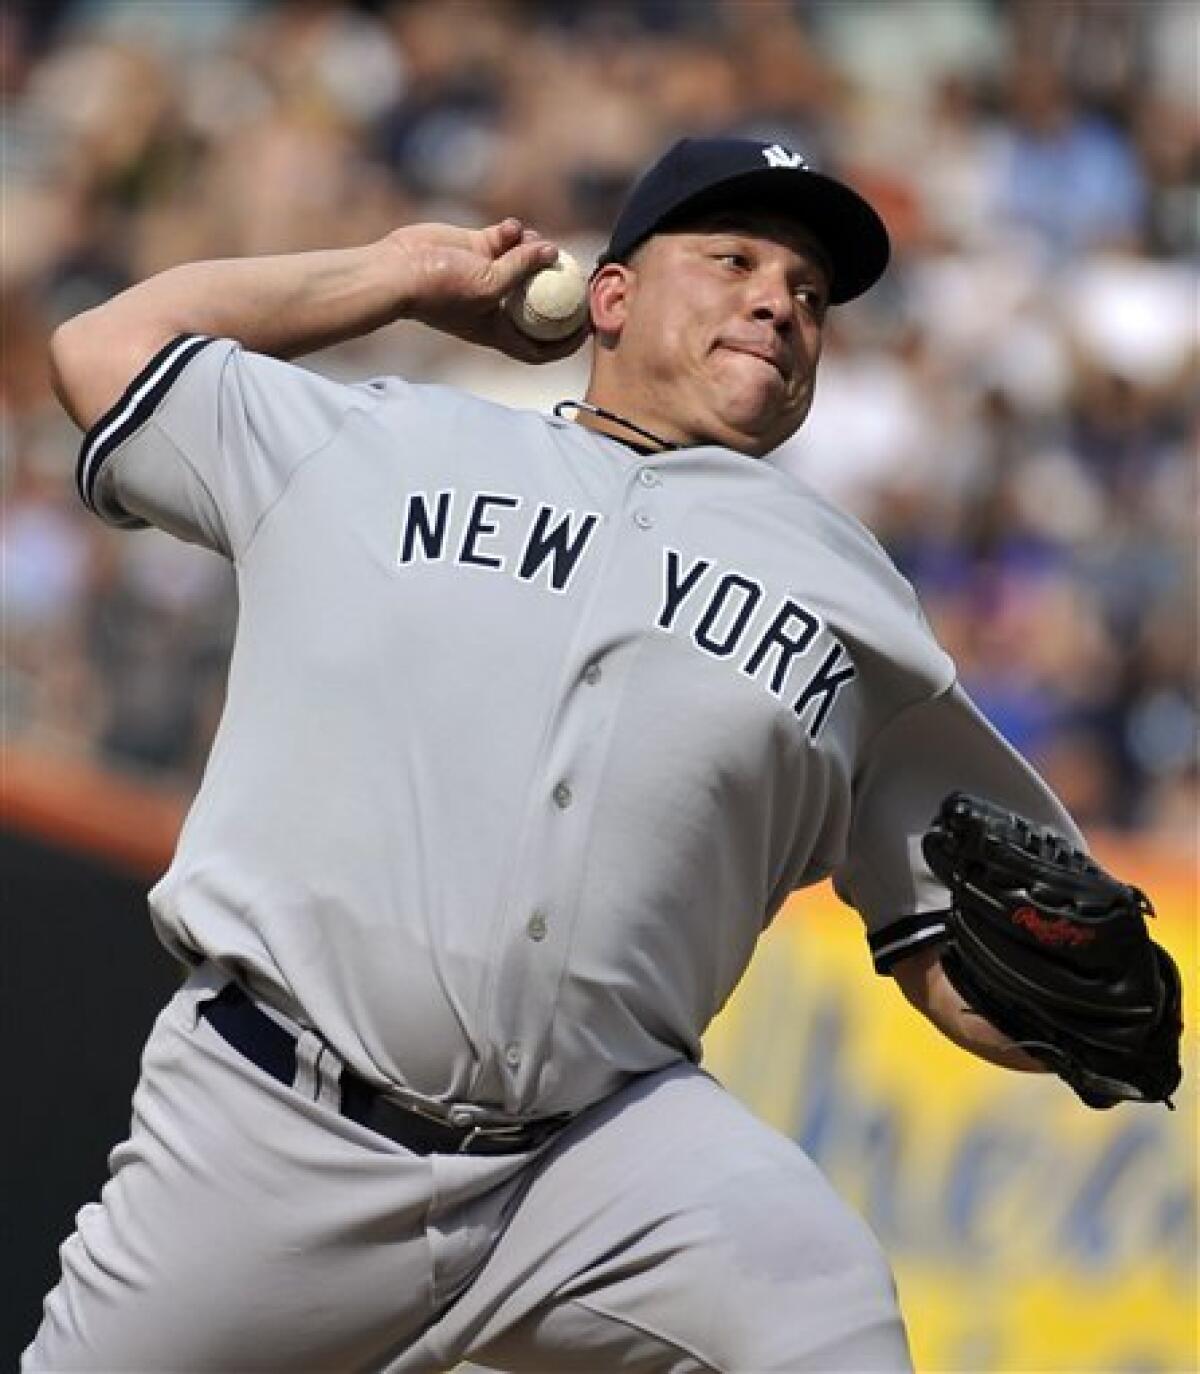 Bartolo Colon might have pitched his last game 